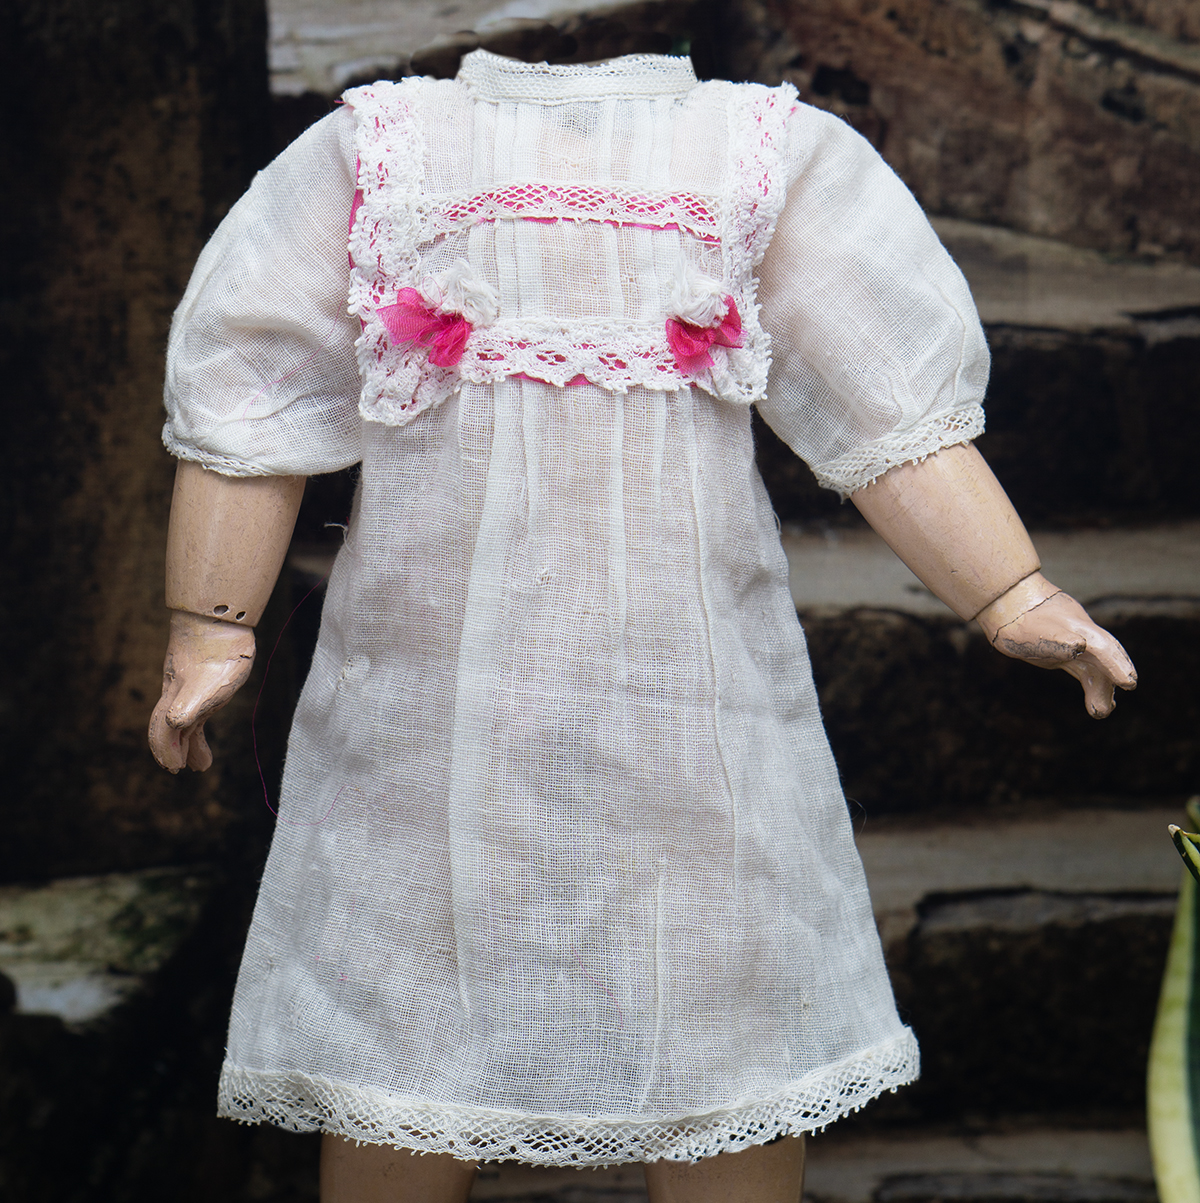 Factpry doll chemise